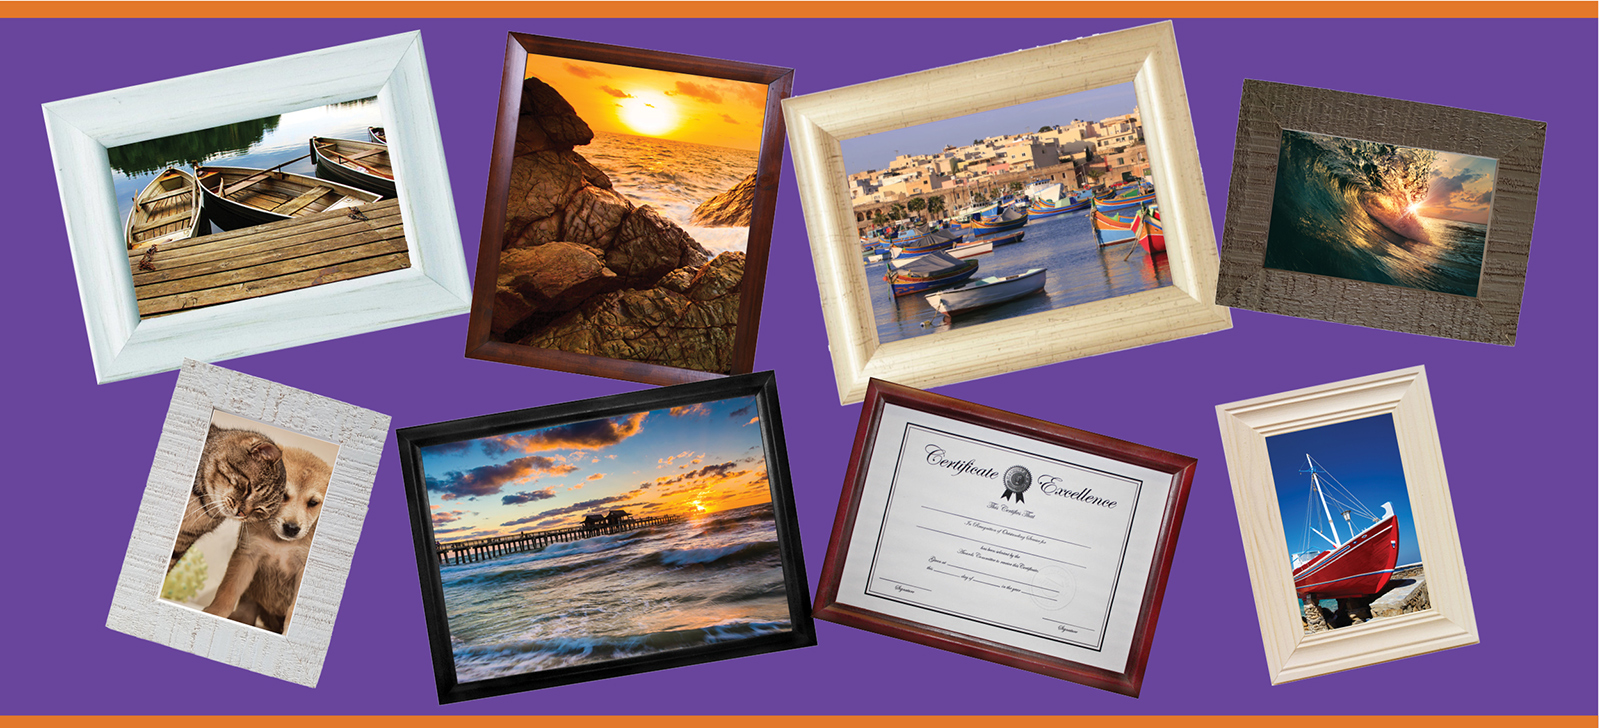 We supply a range of imported high quality Frames and Albums to the market.